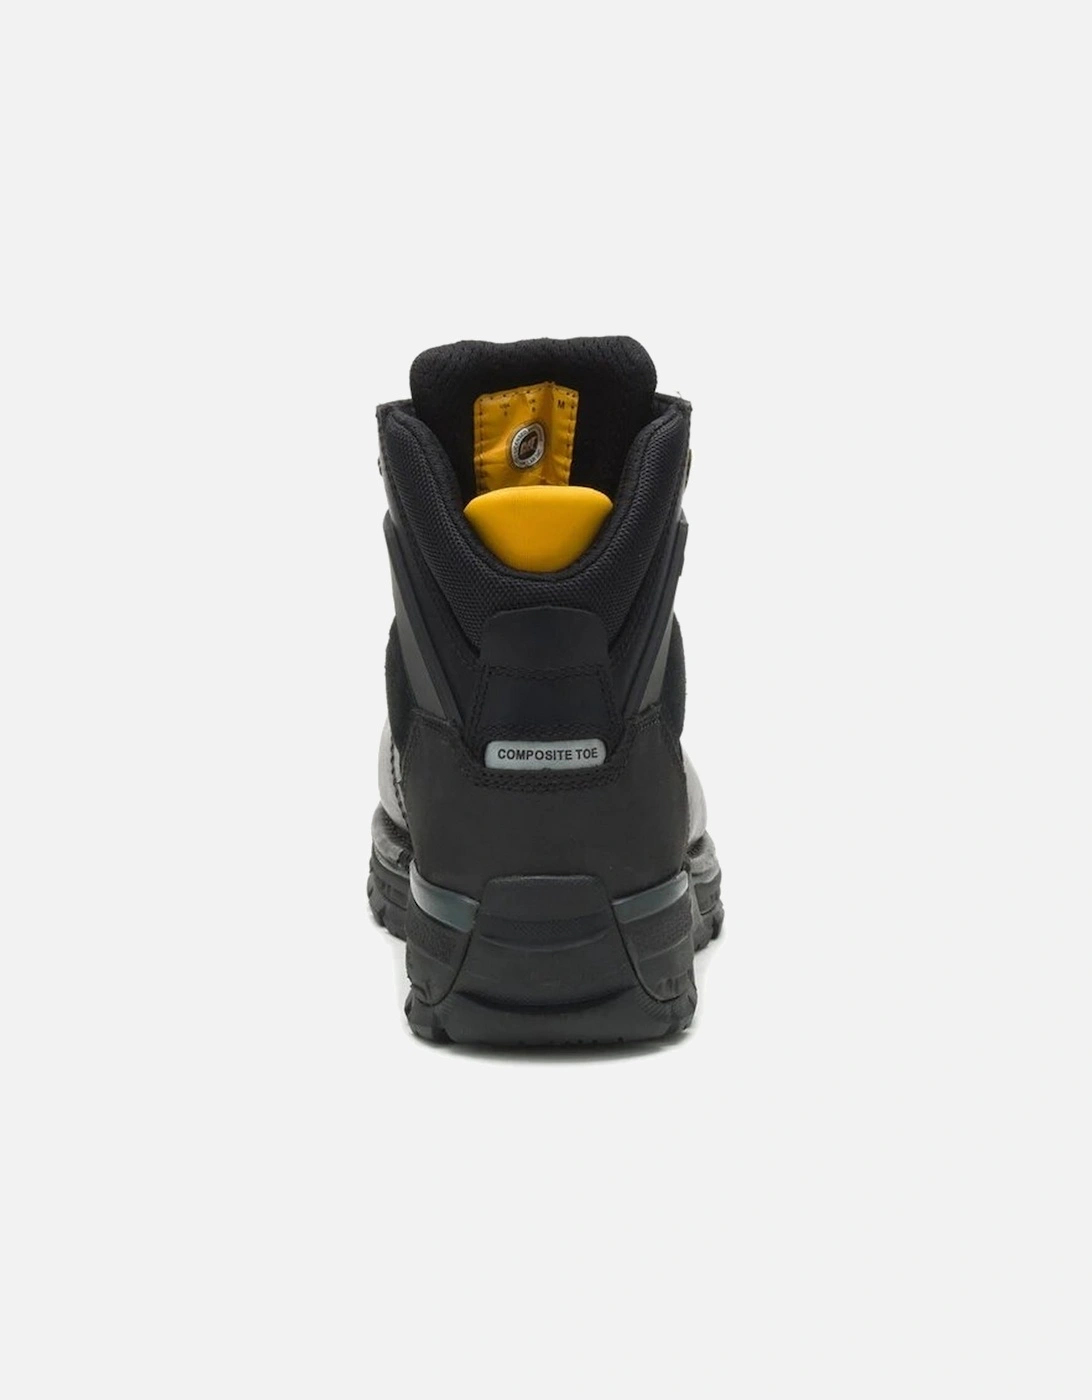 Mens Excavator Grain Leather Safety Boots